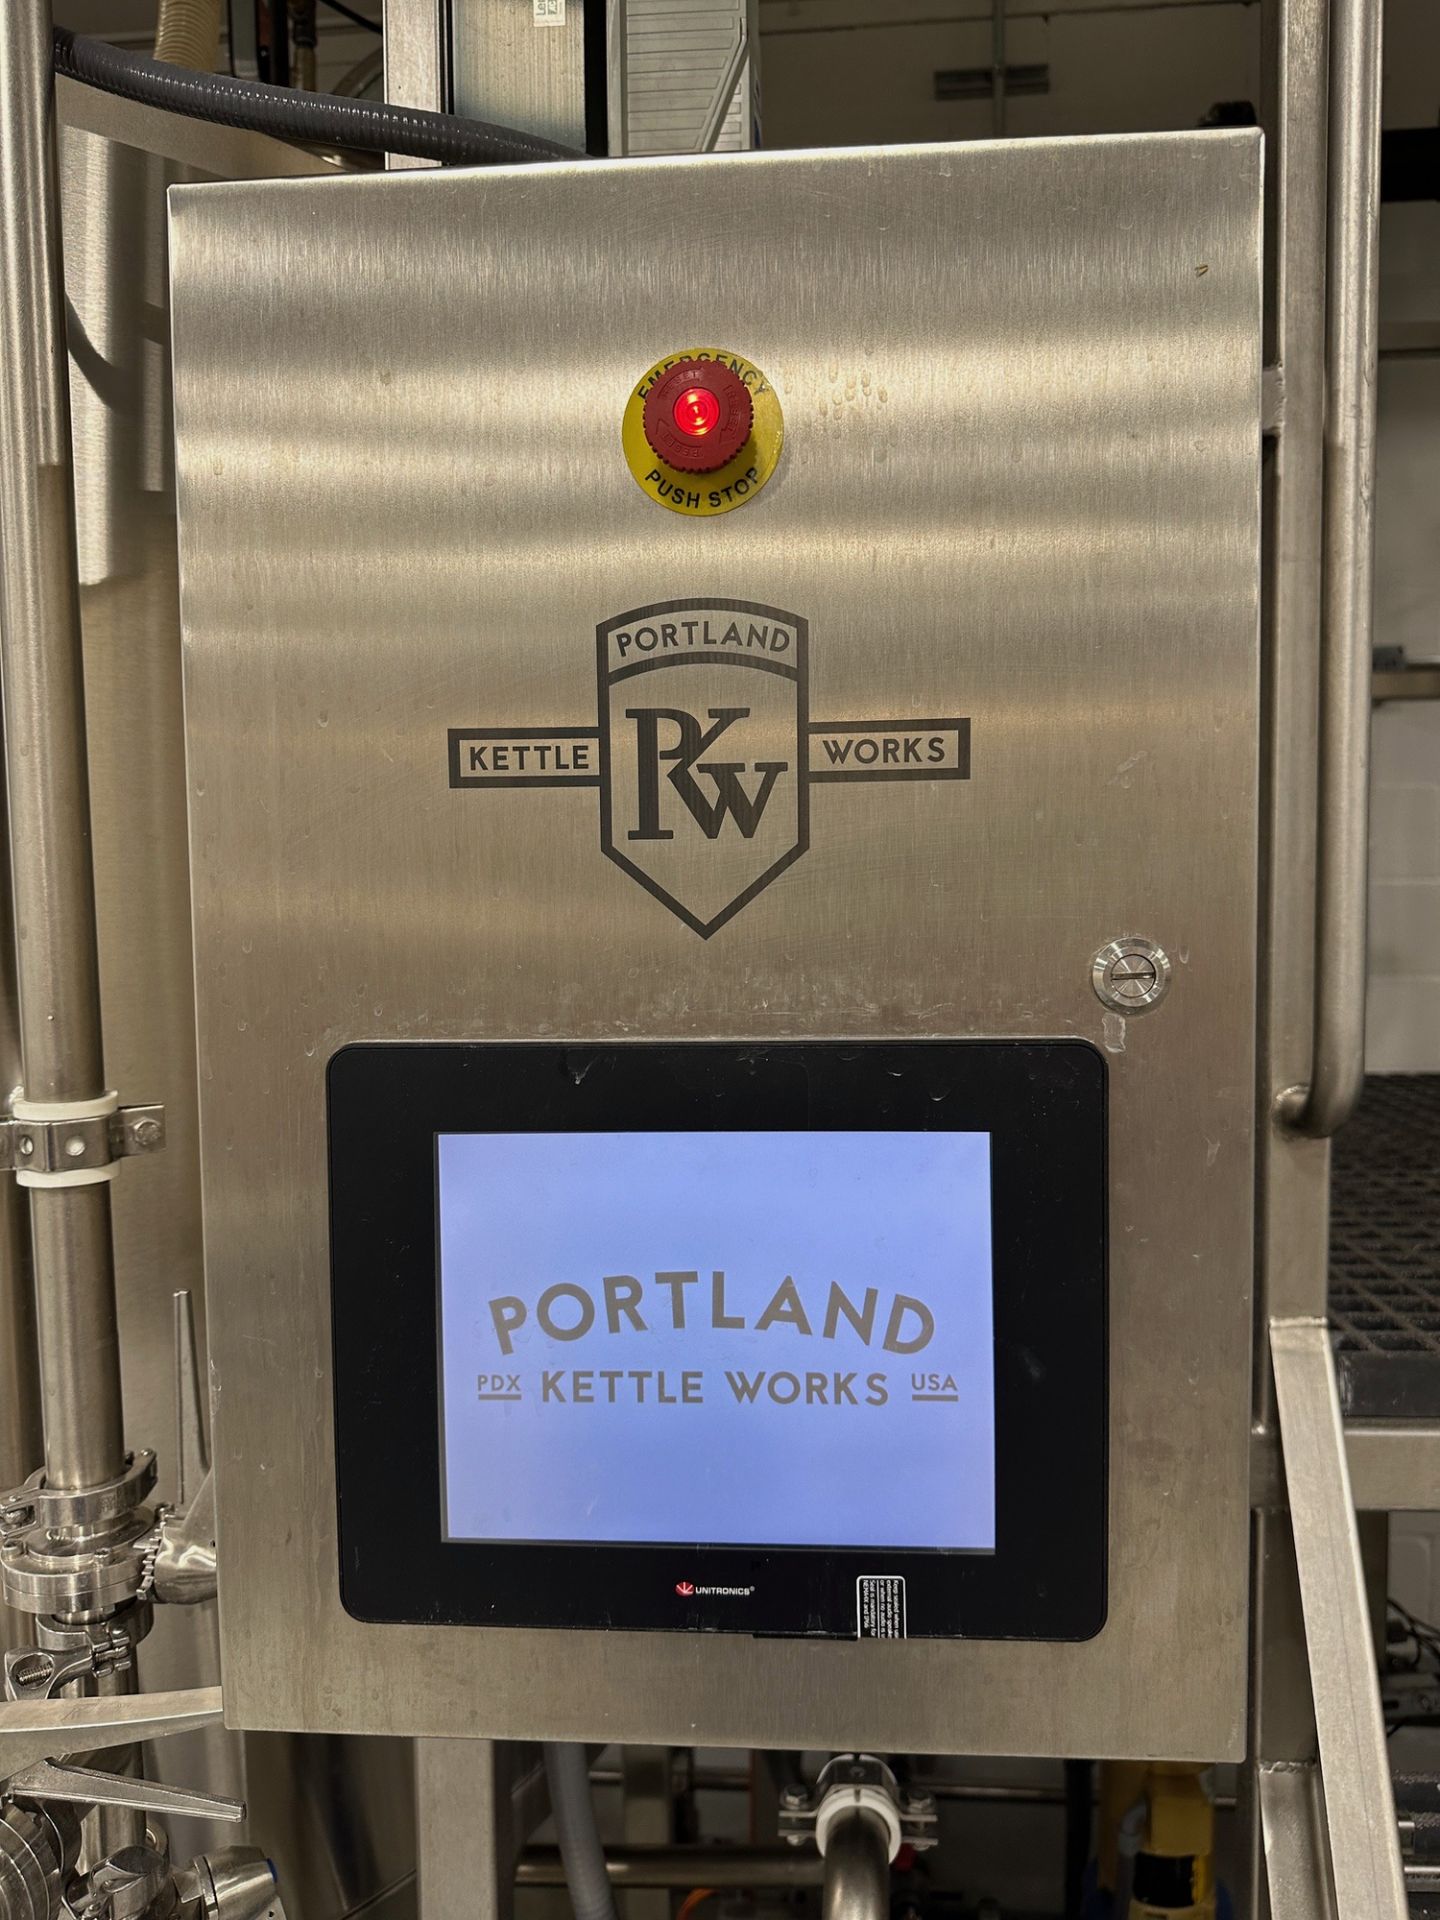 Portland Kettle Works 15 BBL 2-Vessel Stainless Steel Brewhouse - Mash/Lauter (Approx. 6' Diameter - Image 7 of 13